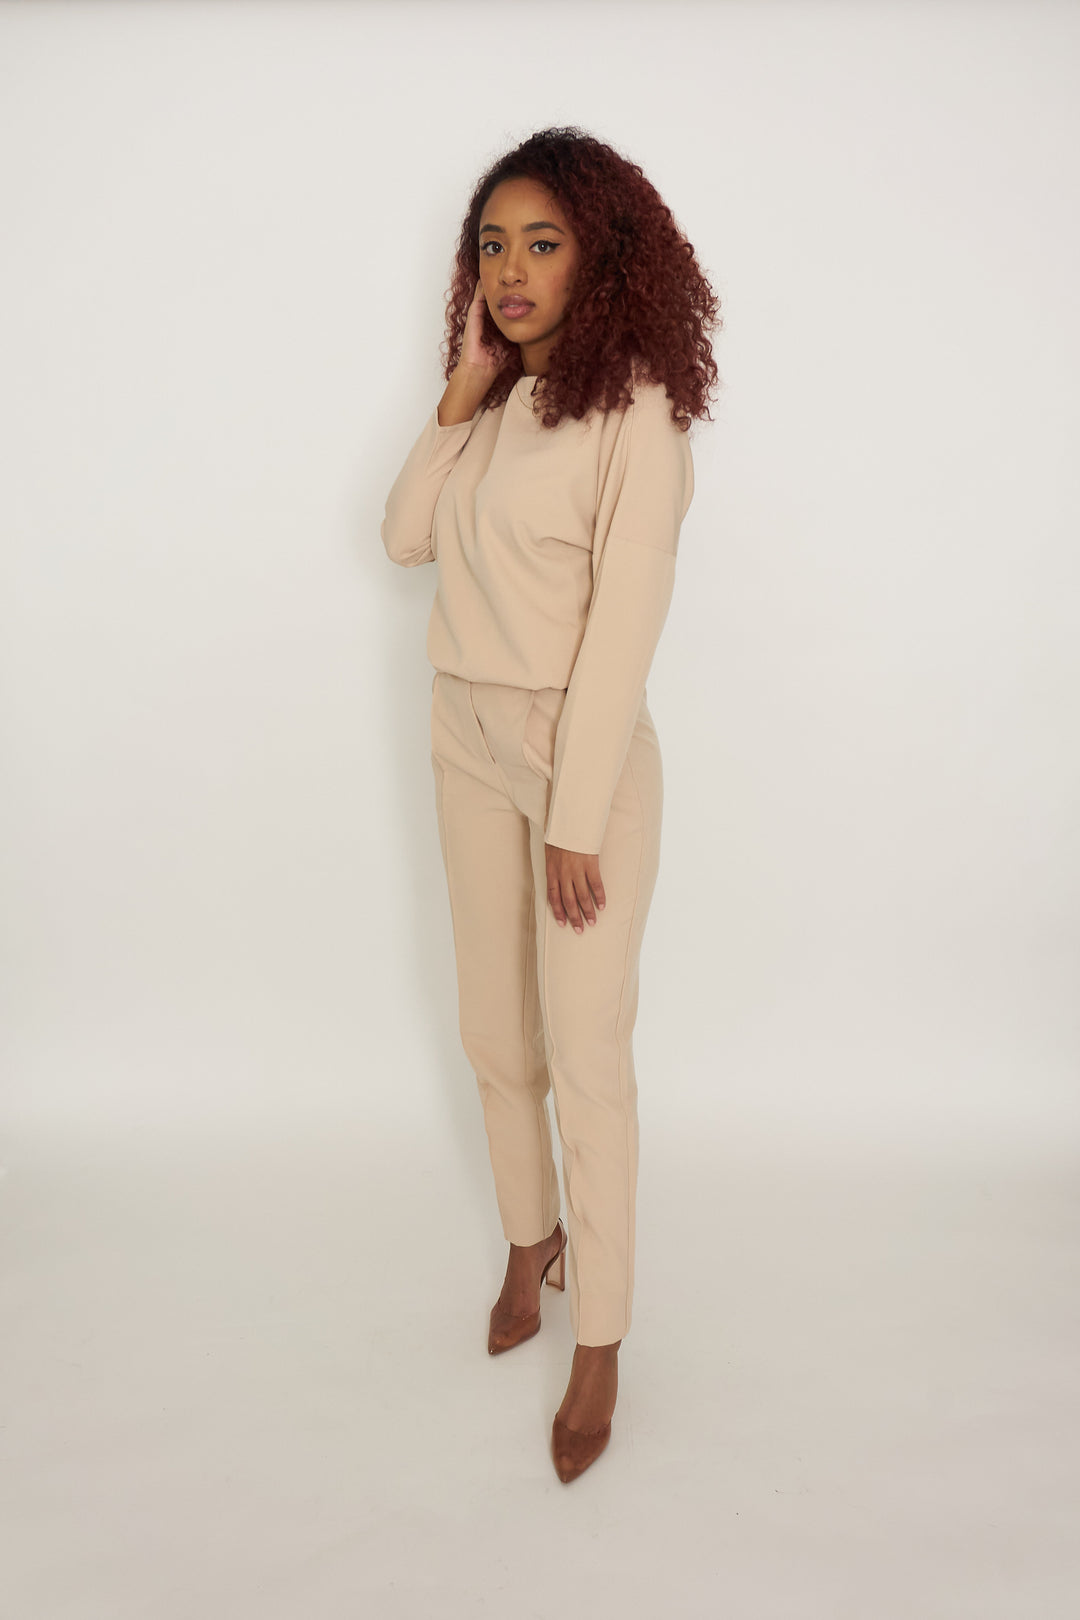 The Classy Girl Set is beige and comes with a long sleeve top that has a waistband bottom to always give the “tucked-in'' look without needing to tuck in the top. The bottoms come with zipper and button front with belt loops,